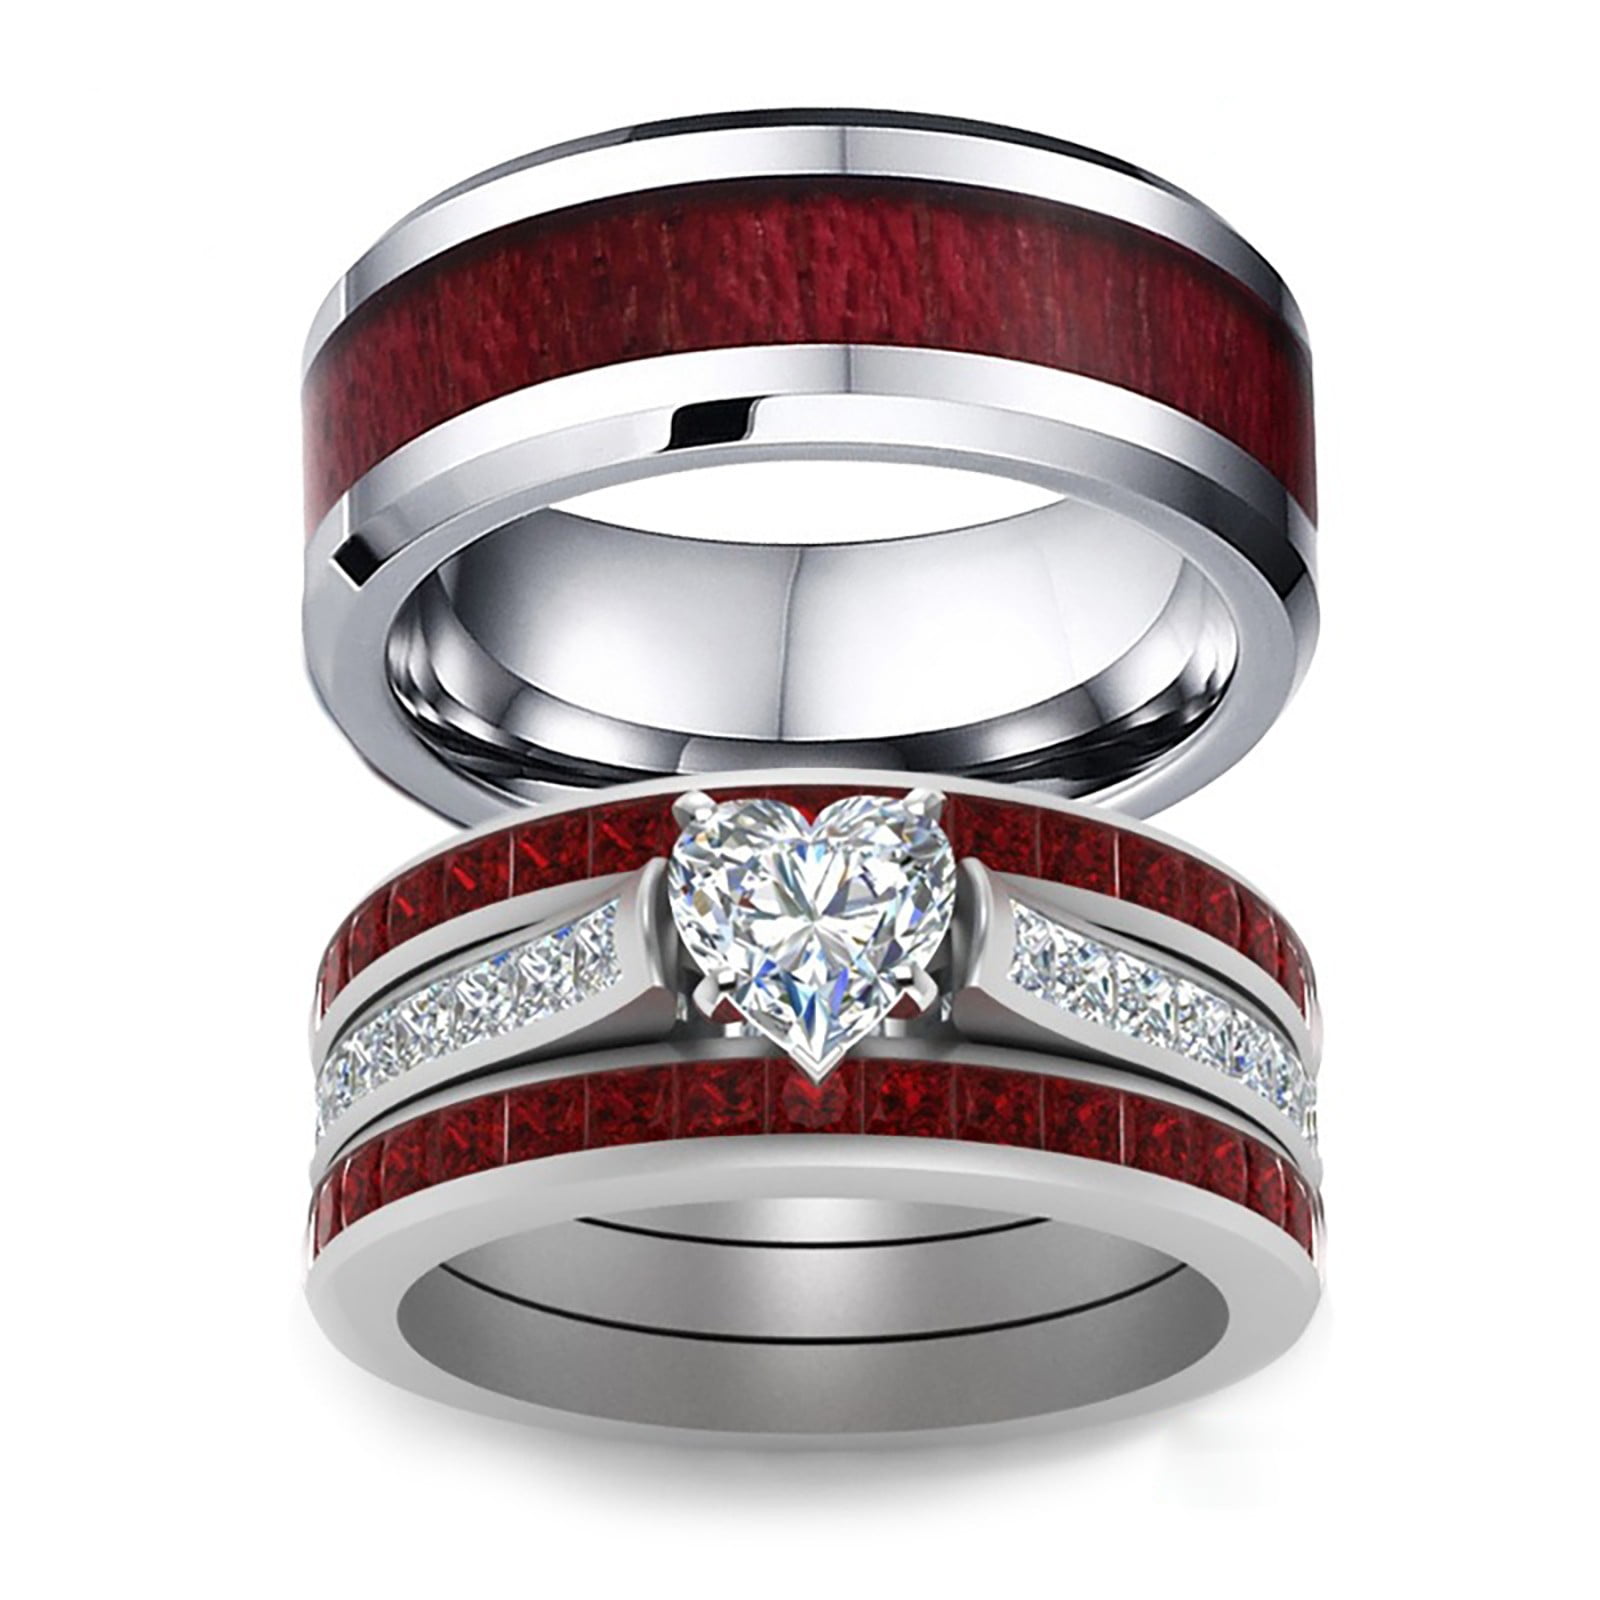 TIHLMK Sales Clearance Promise Rings for Her Womens Rings 2-in-1 Set  Detachable Shiny Diamond Ring Set Engagement Wedding Rings Inlaid Zircon  Ring - Walmart.com